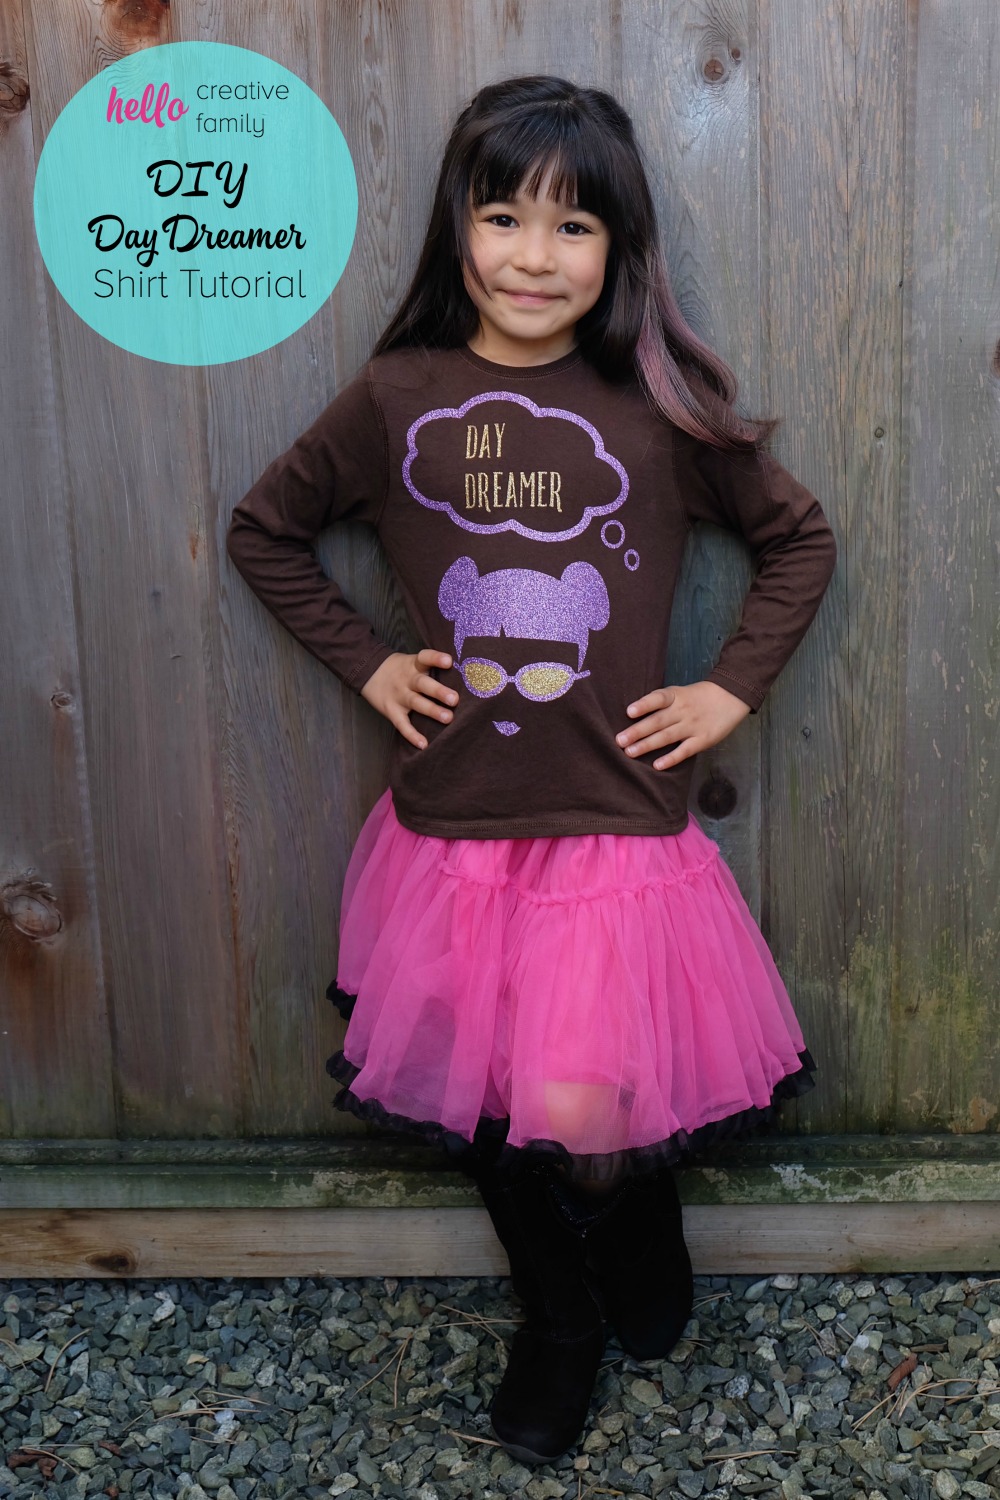 The perfect shirt for the dreamer in your life! This DIY Day Dreamer shirt can be made in minutes using the Cricut Explore. The project has a cute little girl with pigtail buns and says Day Dreamer and would be lovely for girl's clothing!